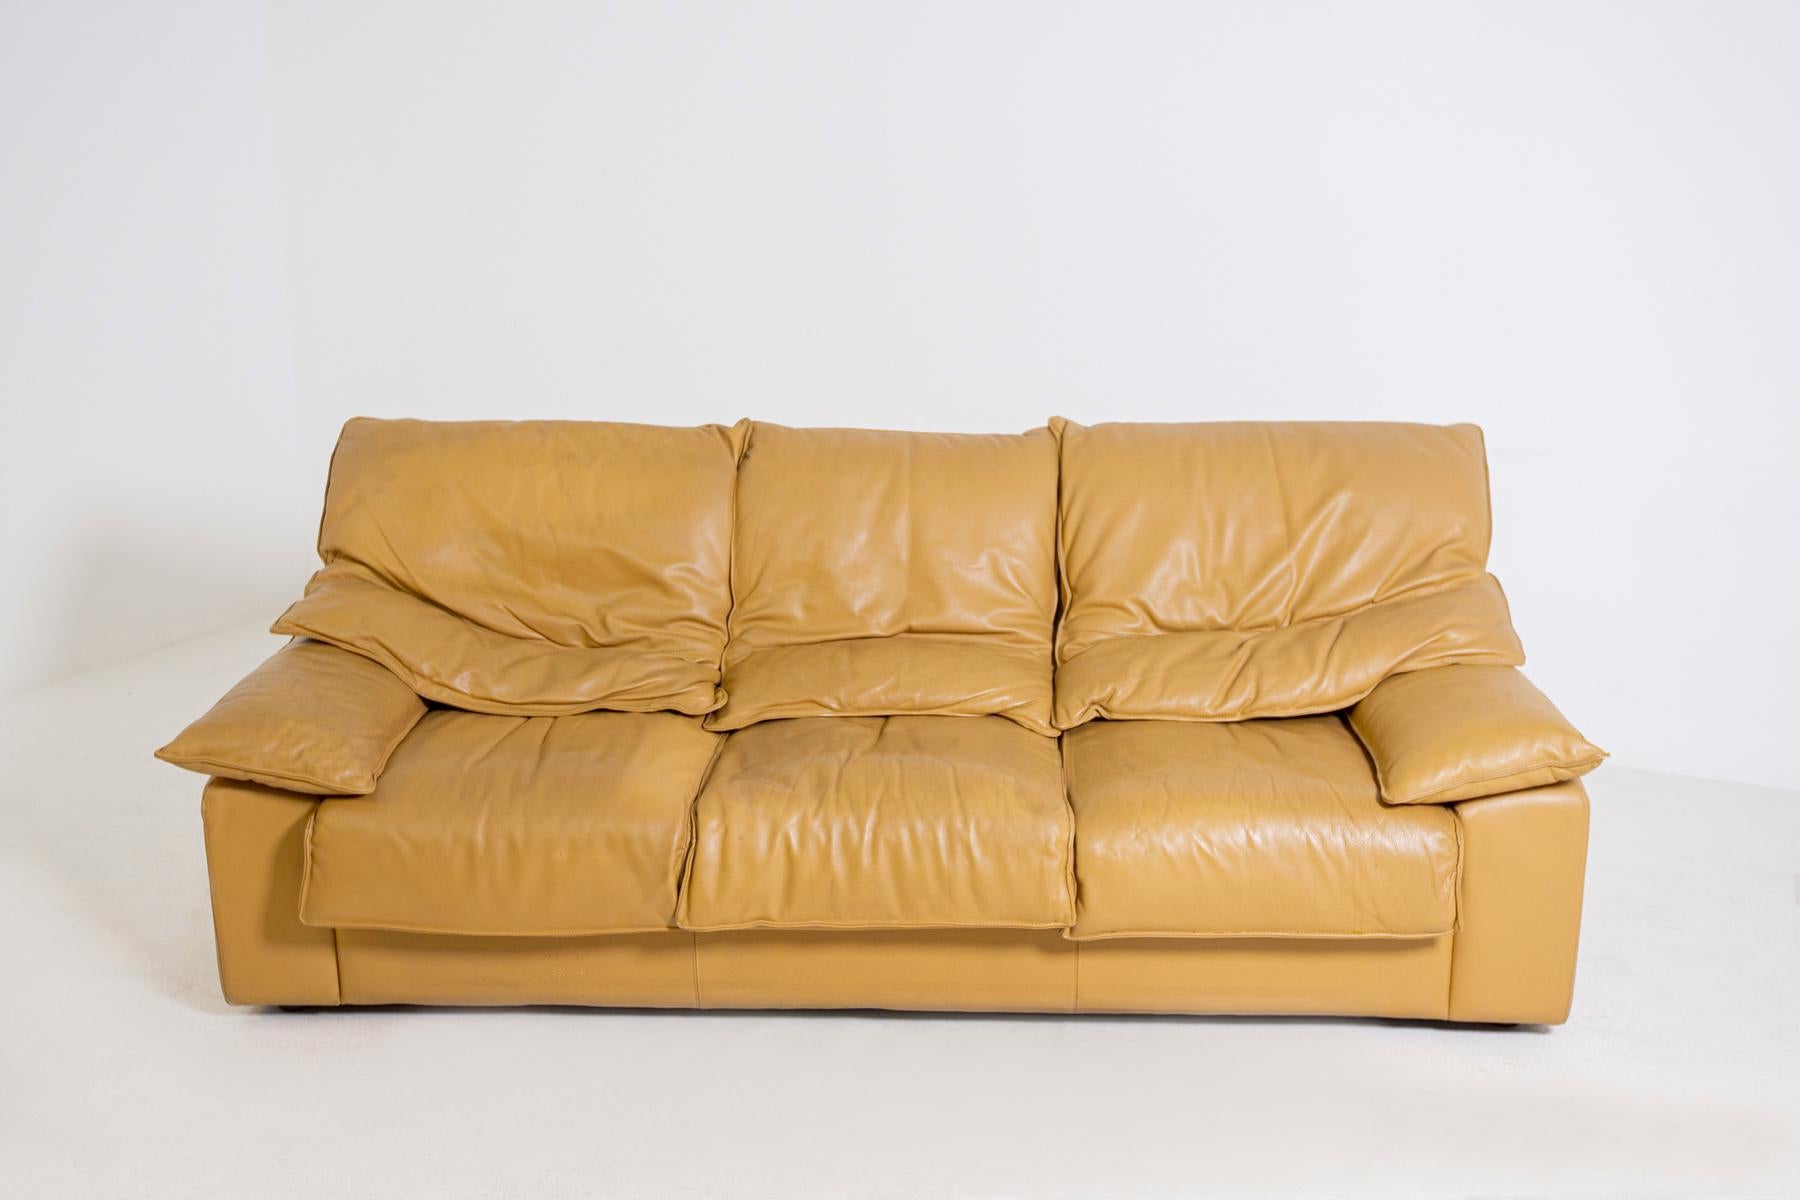 Mid-Century Modern Vintage Italian Sofa Camel-Colored Leather Three-Seat, 1970s For Sale